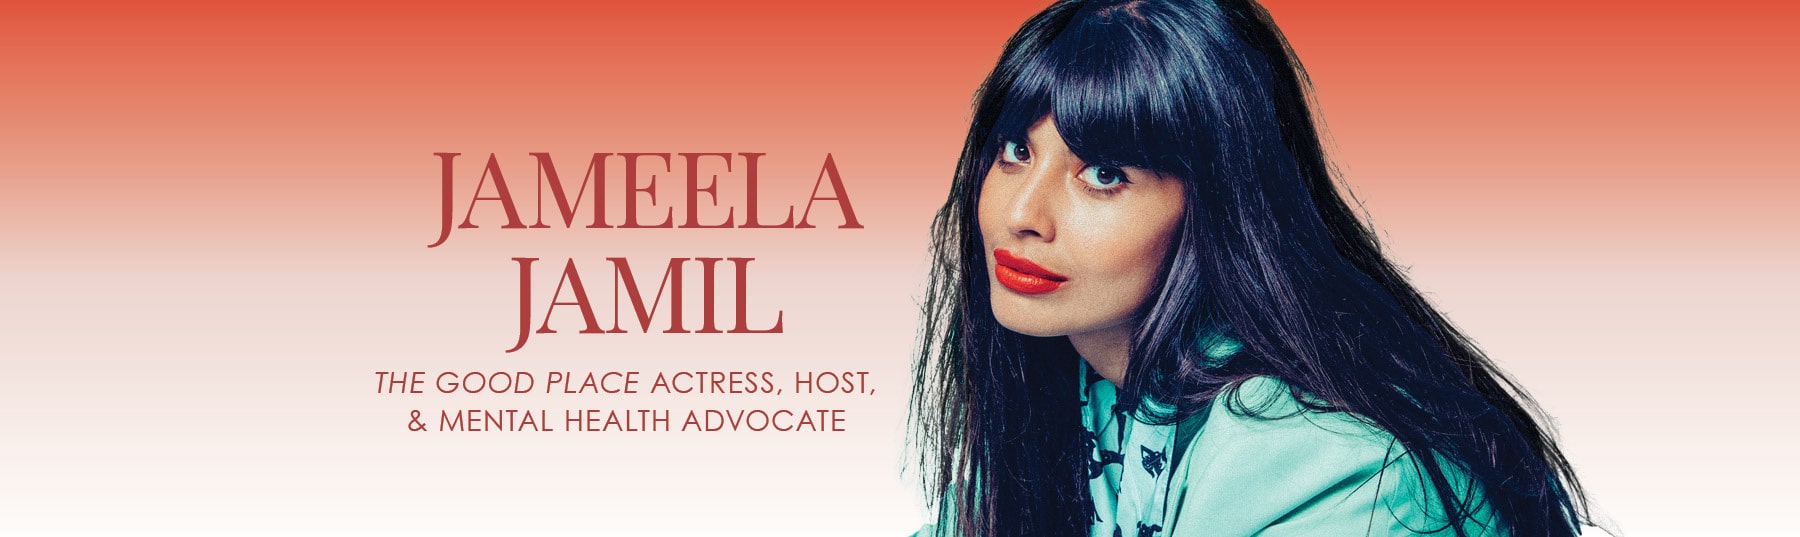 Join Jameela Jamil, The Good Place actress, host and mental health advocate at the TX Conference for Women this November 16th!